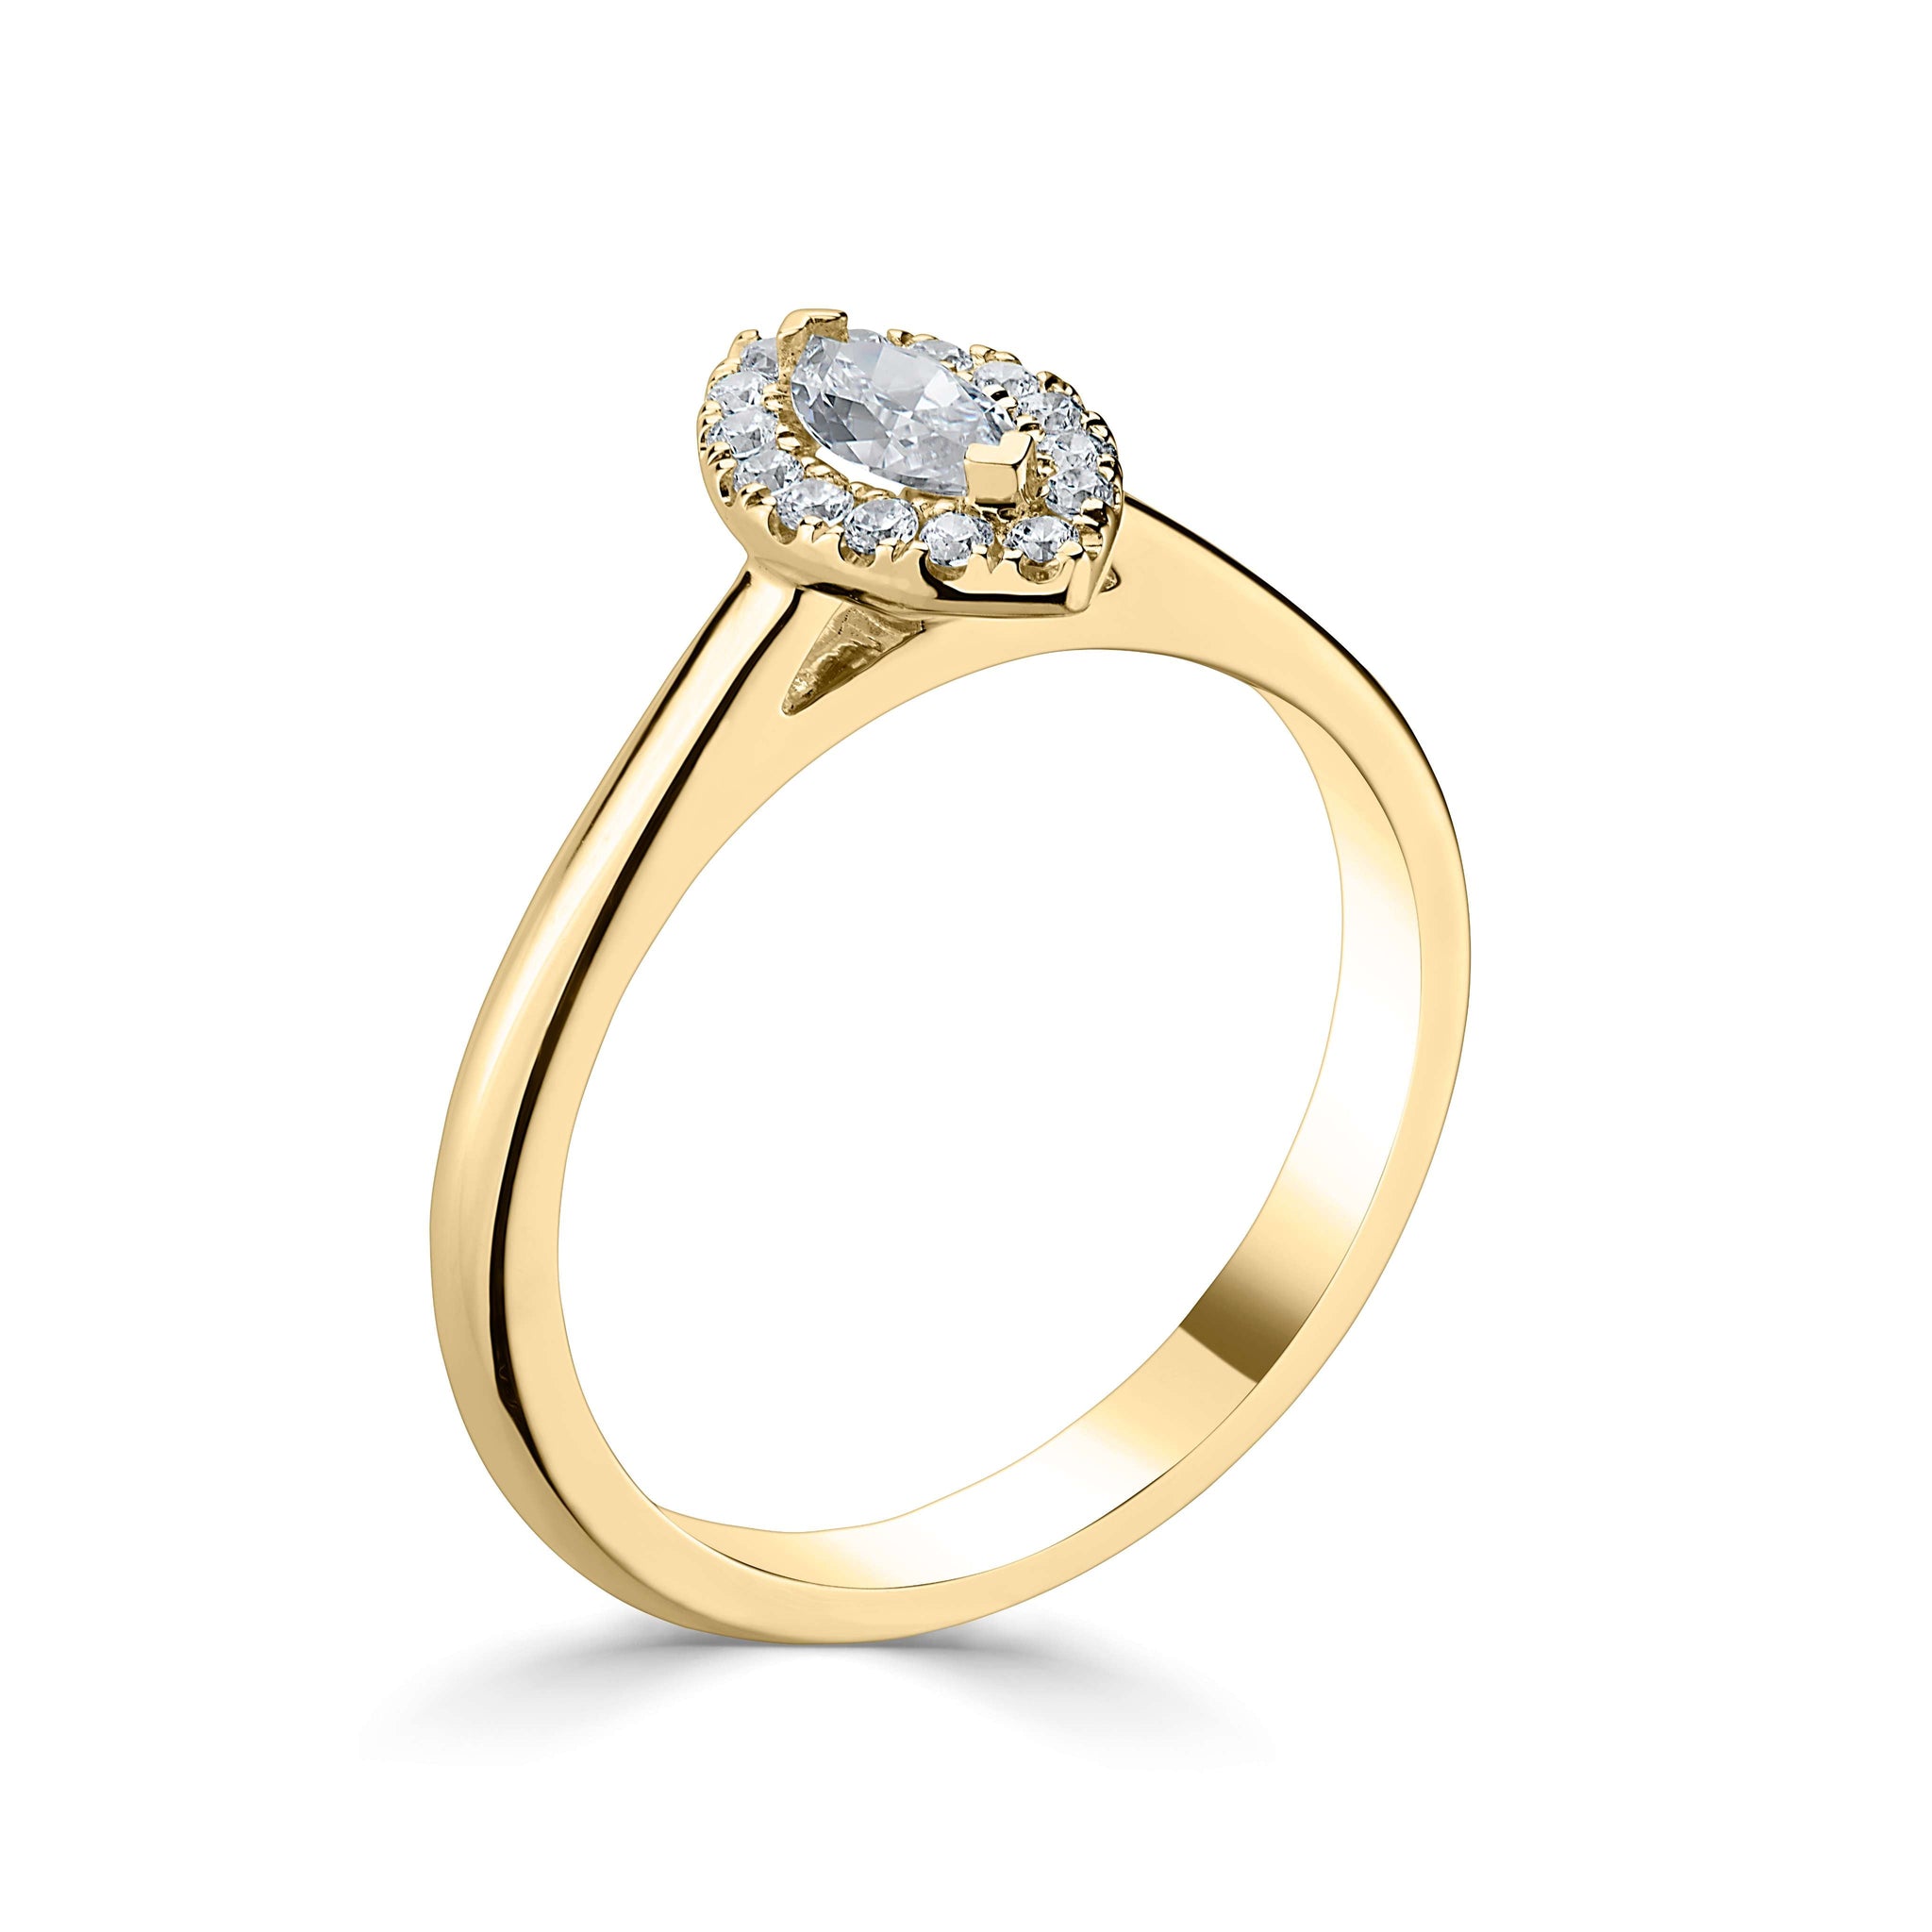 Carmen *Select a Marquise Shape Diamond 0.30ct or above